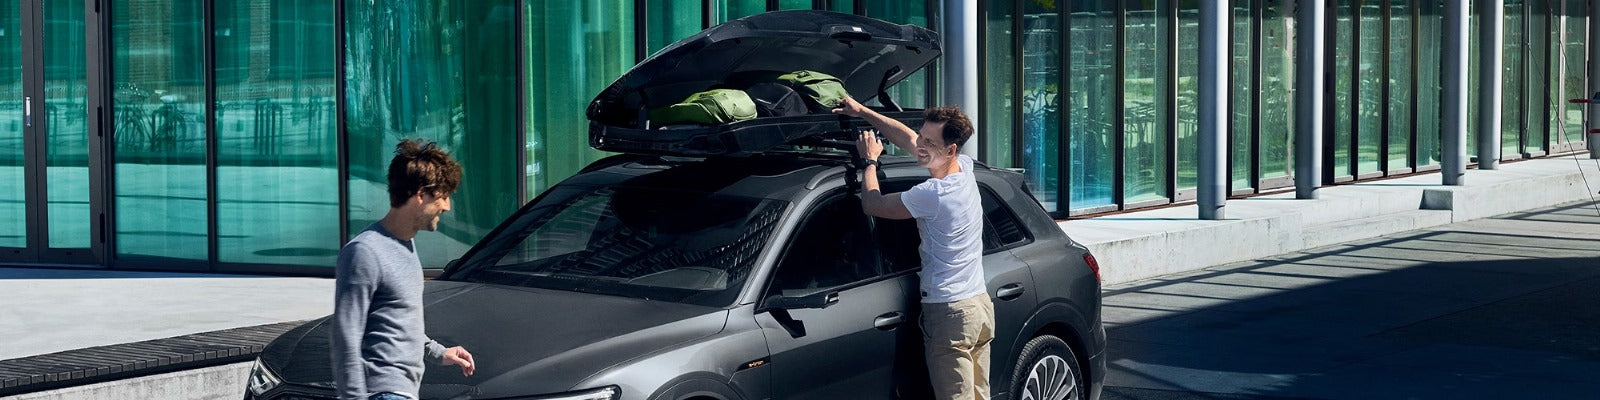 Why Buy a Thule Roof Box Over Other Brands: The Ultimate Cargo Solution